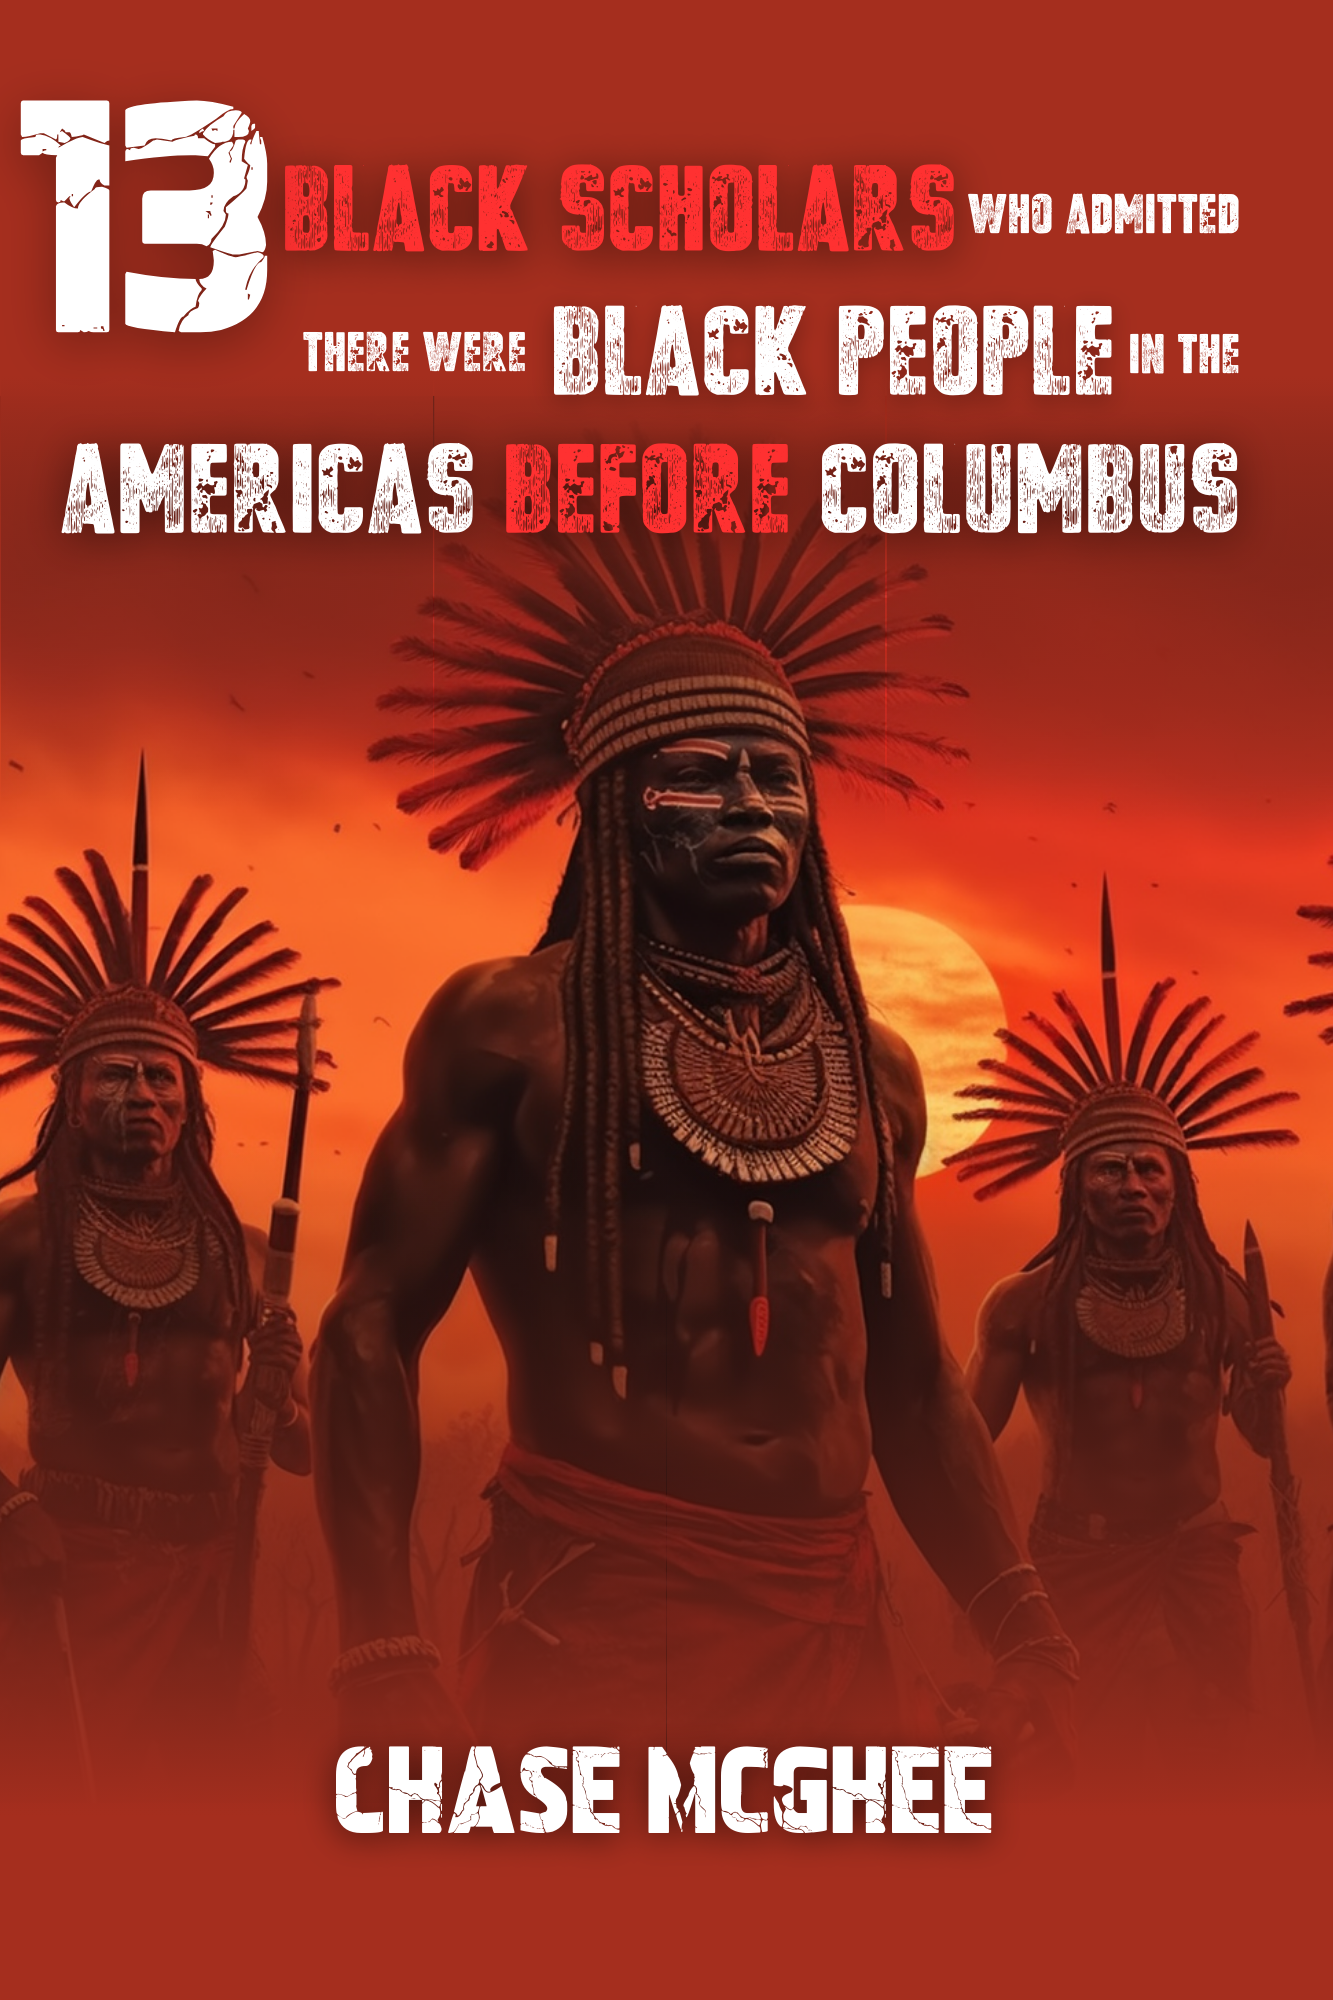 13 Black Scholars Who Admitted there were Black people in the Americas before Columbus